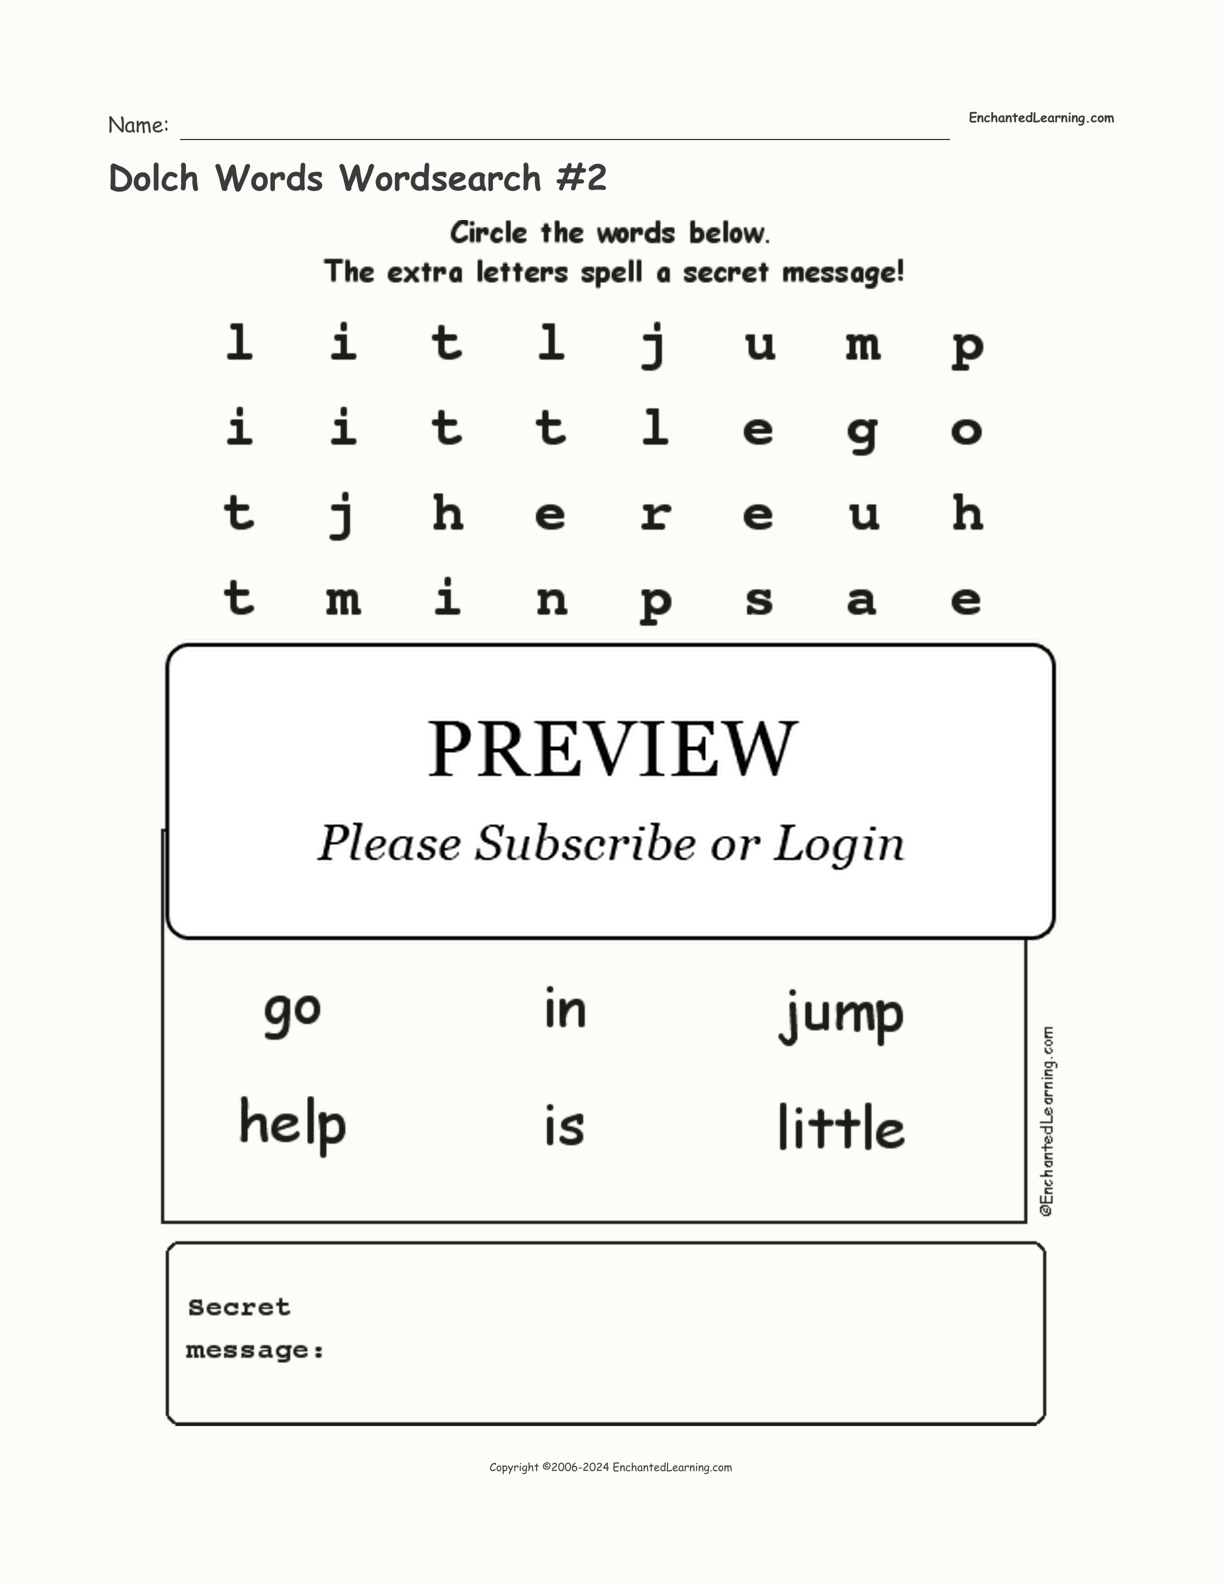 Dolch Words Wordsearch #2 interactive worksheet page 1